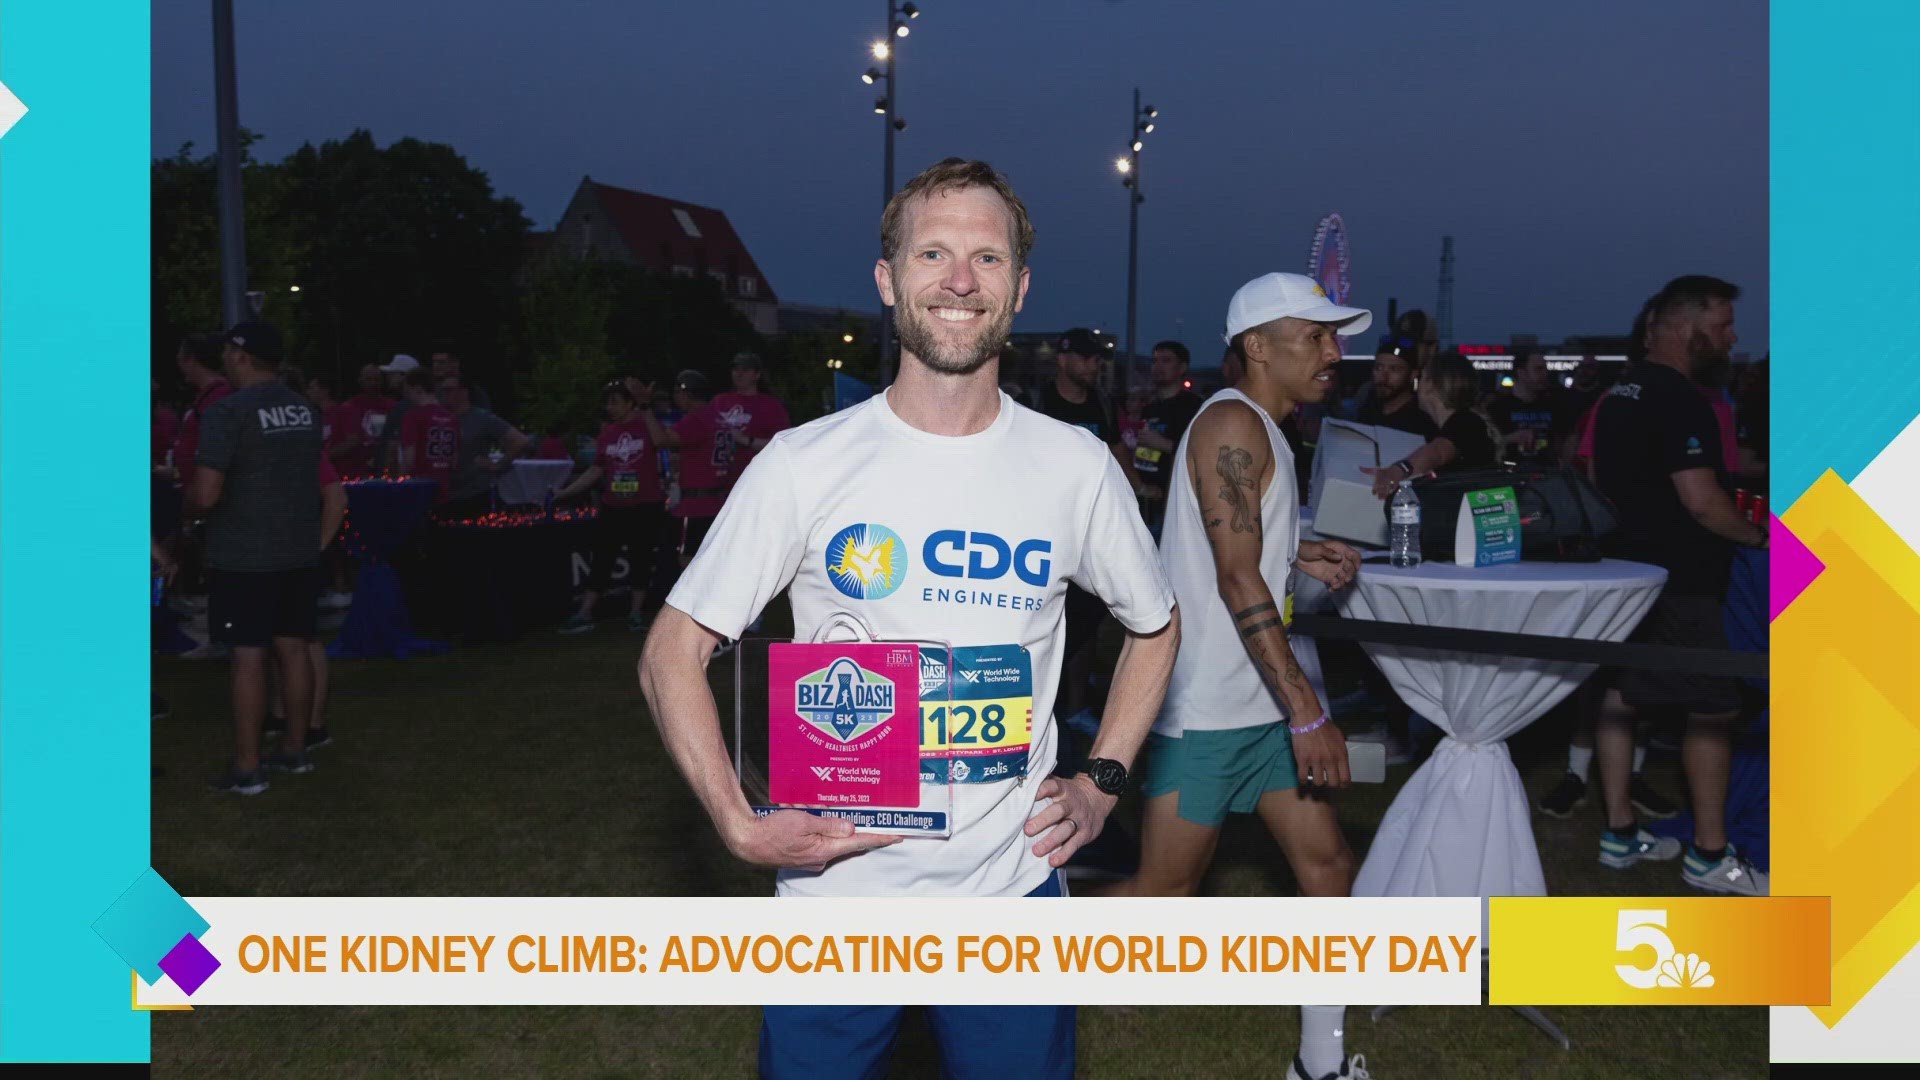 He donated his kidney to a stranger but is still living his best life. Hear about his next big adventure to advocate for World Kidney Day on March 14.